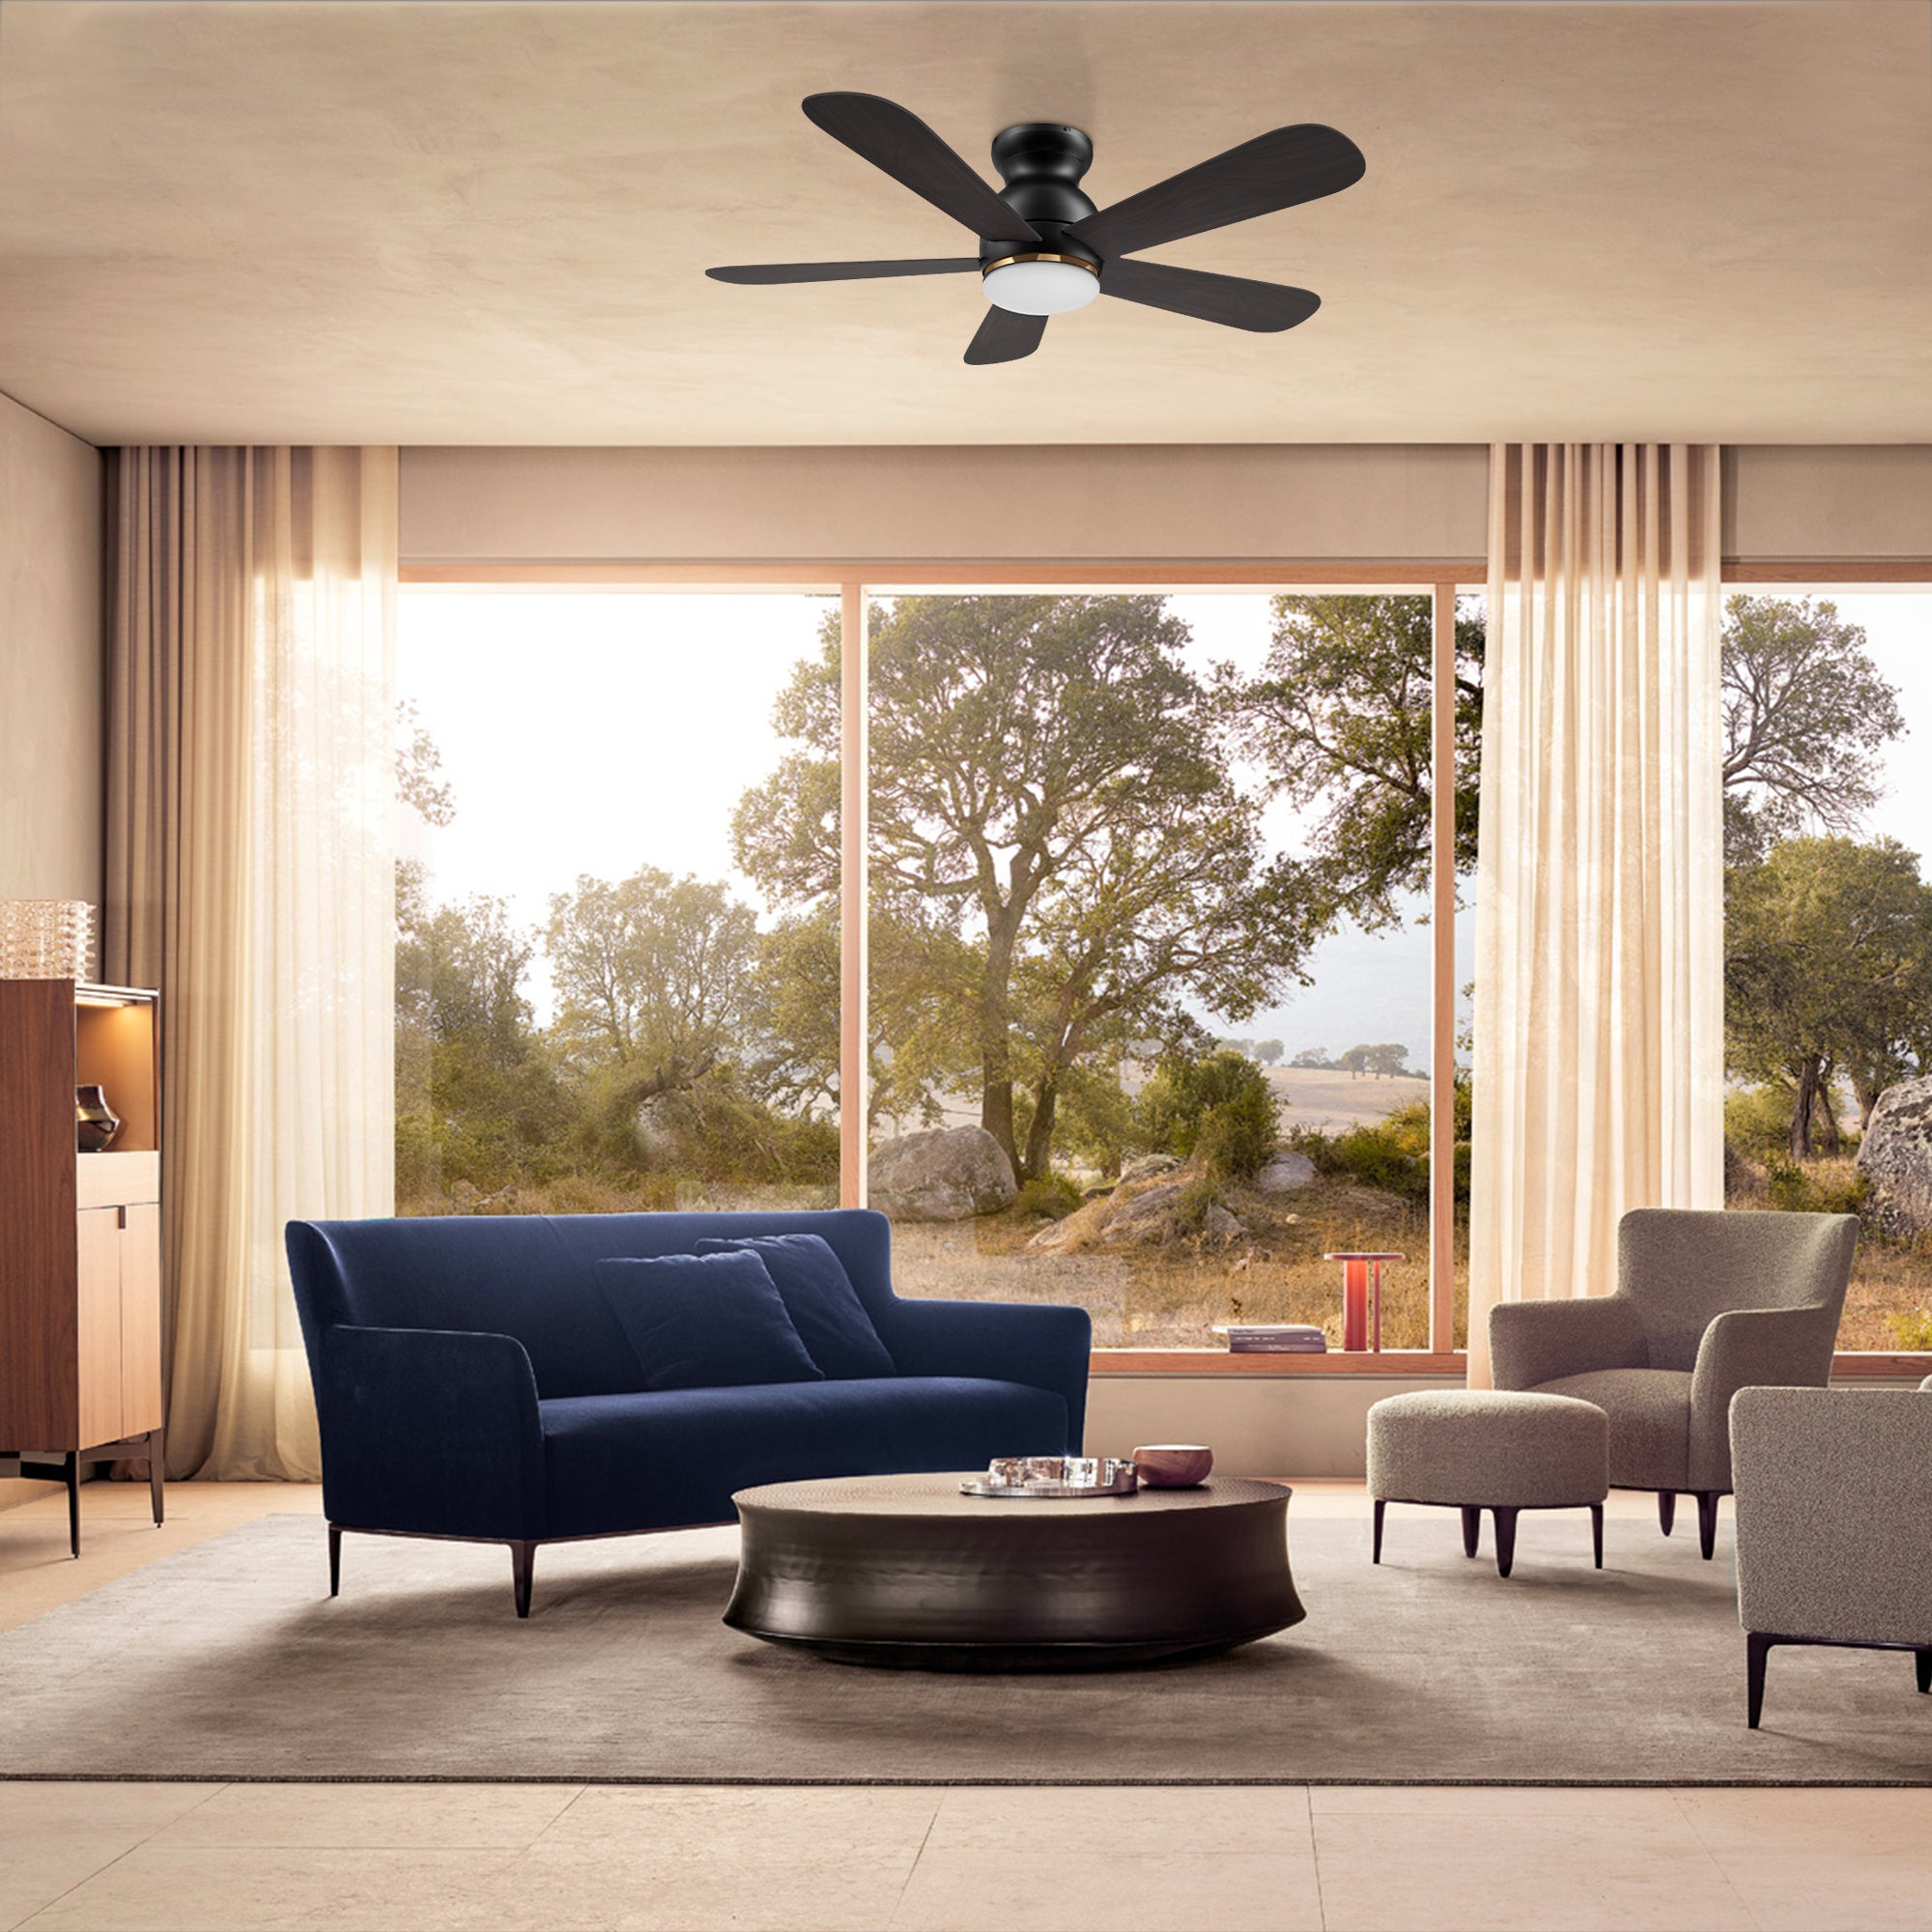 This Kaze 48&#39;&#39; smart ceiling fan are made with incredibly efficient and completely silent DC motors, full function remote control - fan speed, light on/off/dim, reverse function, including 10-speed reversible motor allows you to change the direction of your fan from downdraft mode during the summer to updraft mode during the winter.